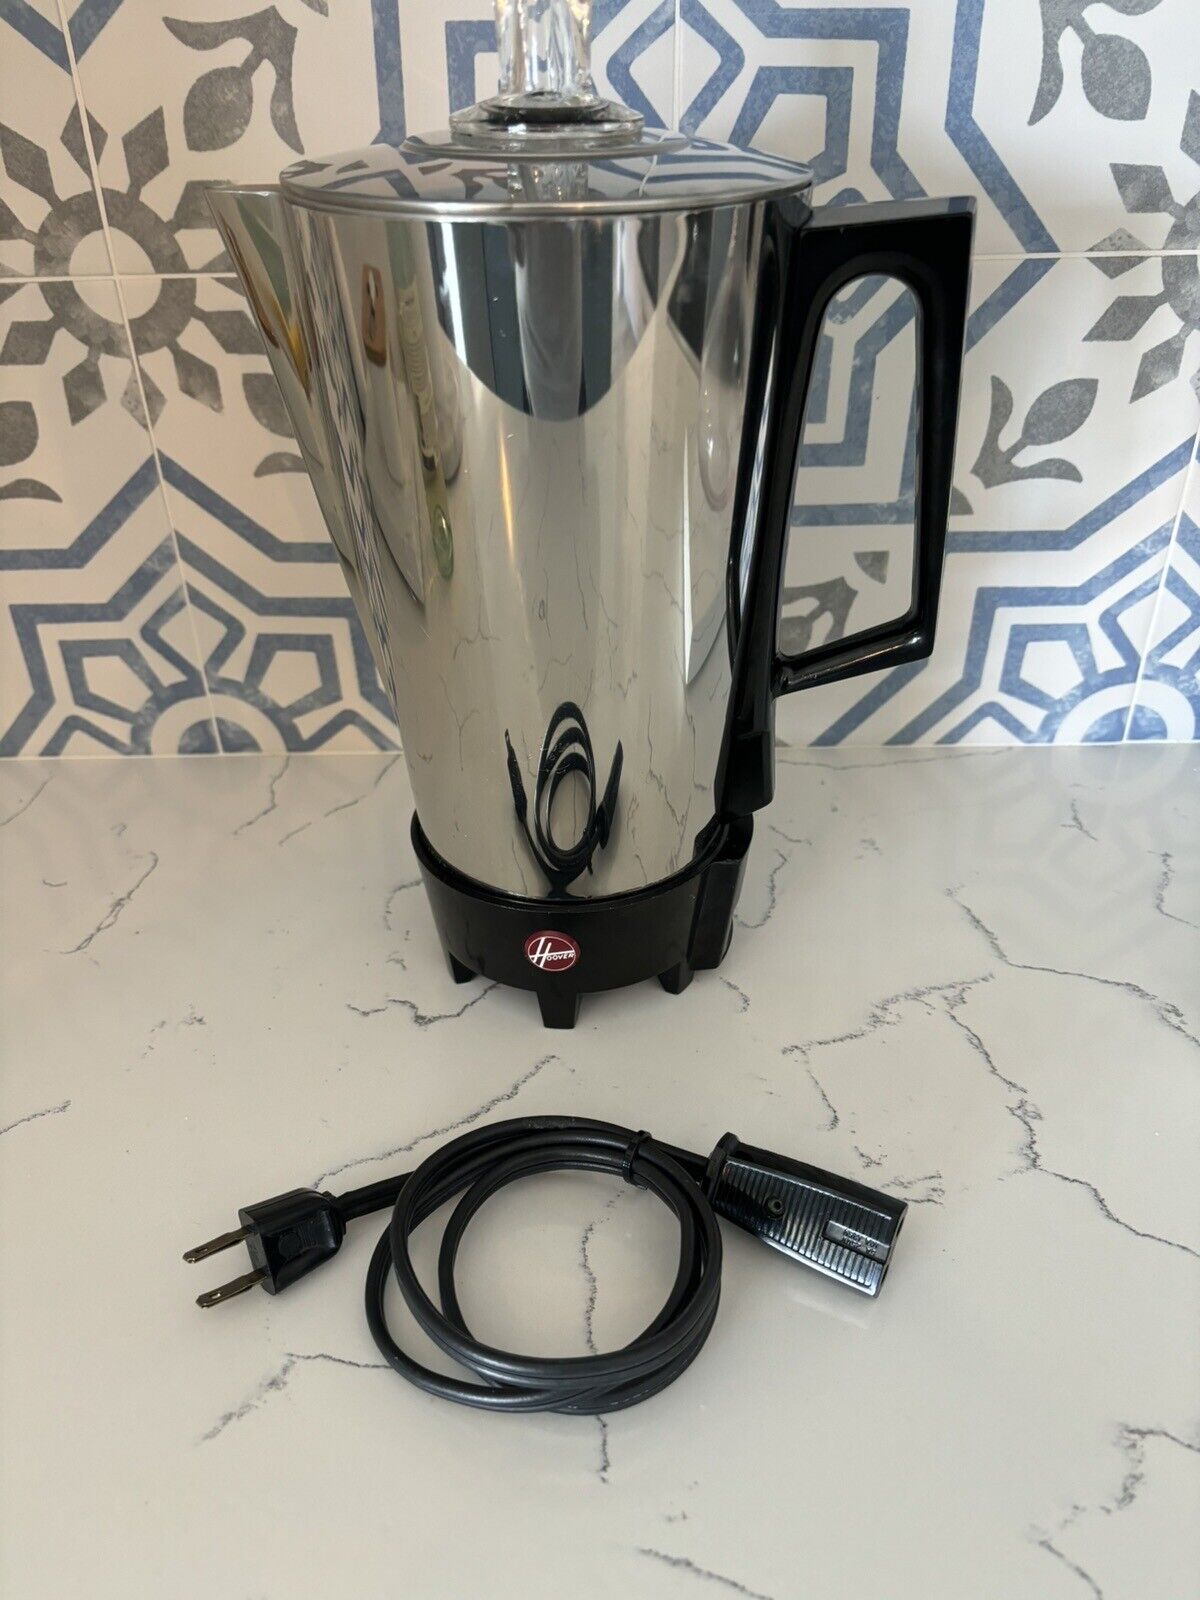 Vintage HOOVER 8811 Percolator Coffee Maker Pot 9 Cups Complete Super CLEAN